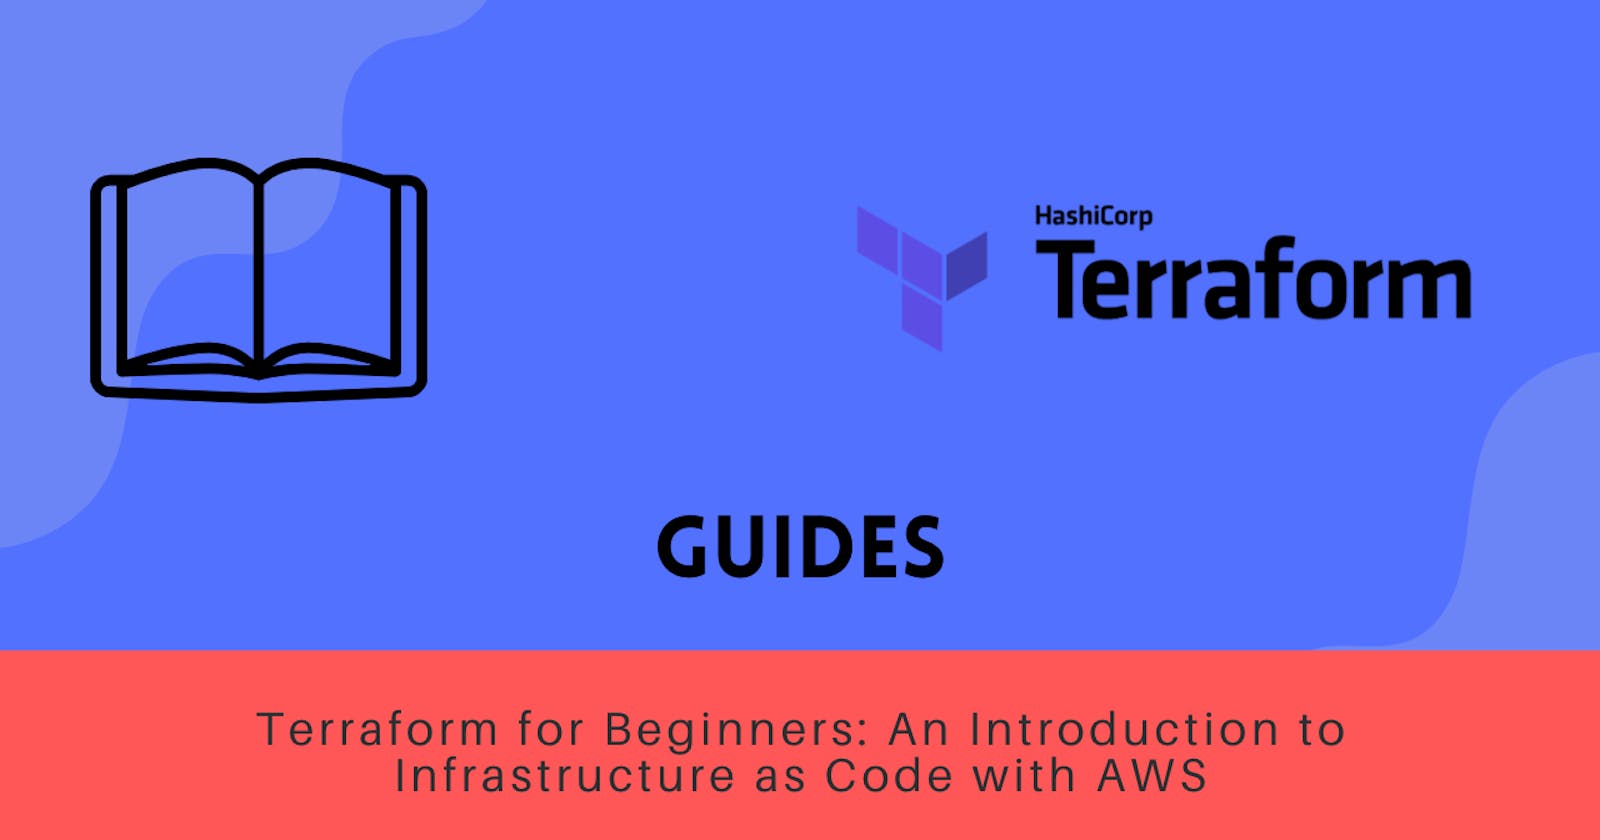 Terraform for Beginners: An Introduction to Infrastructure as Code with AWS